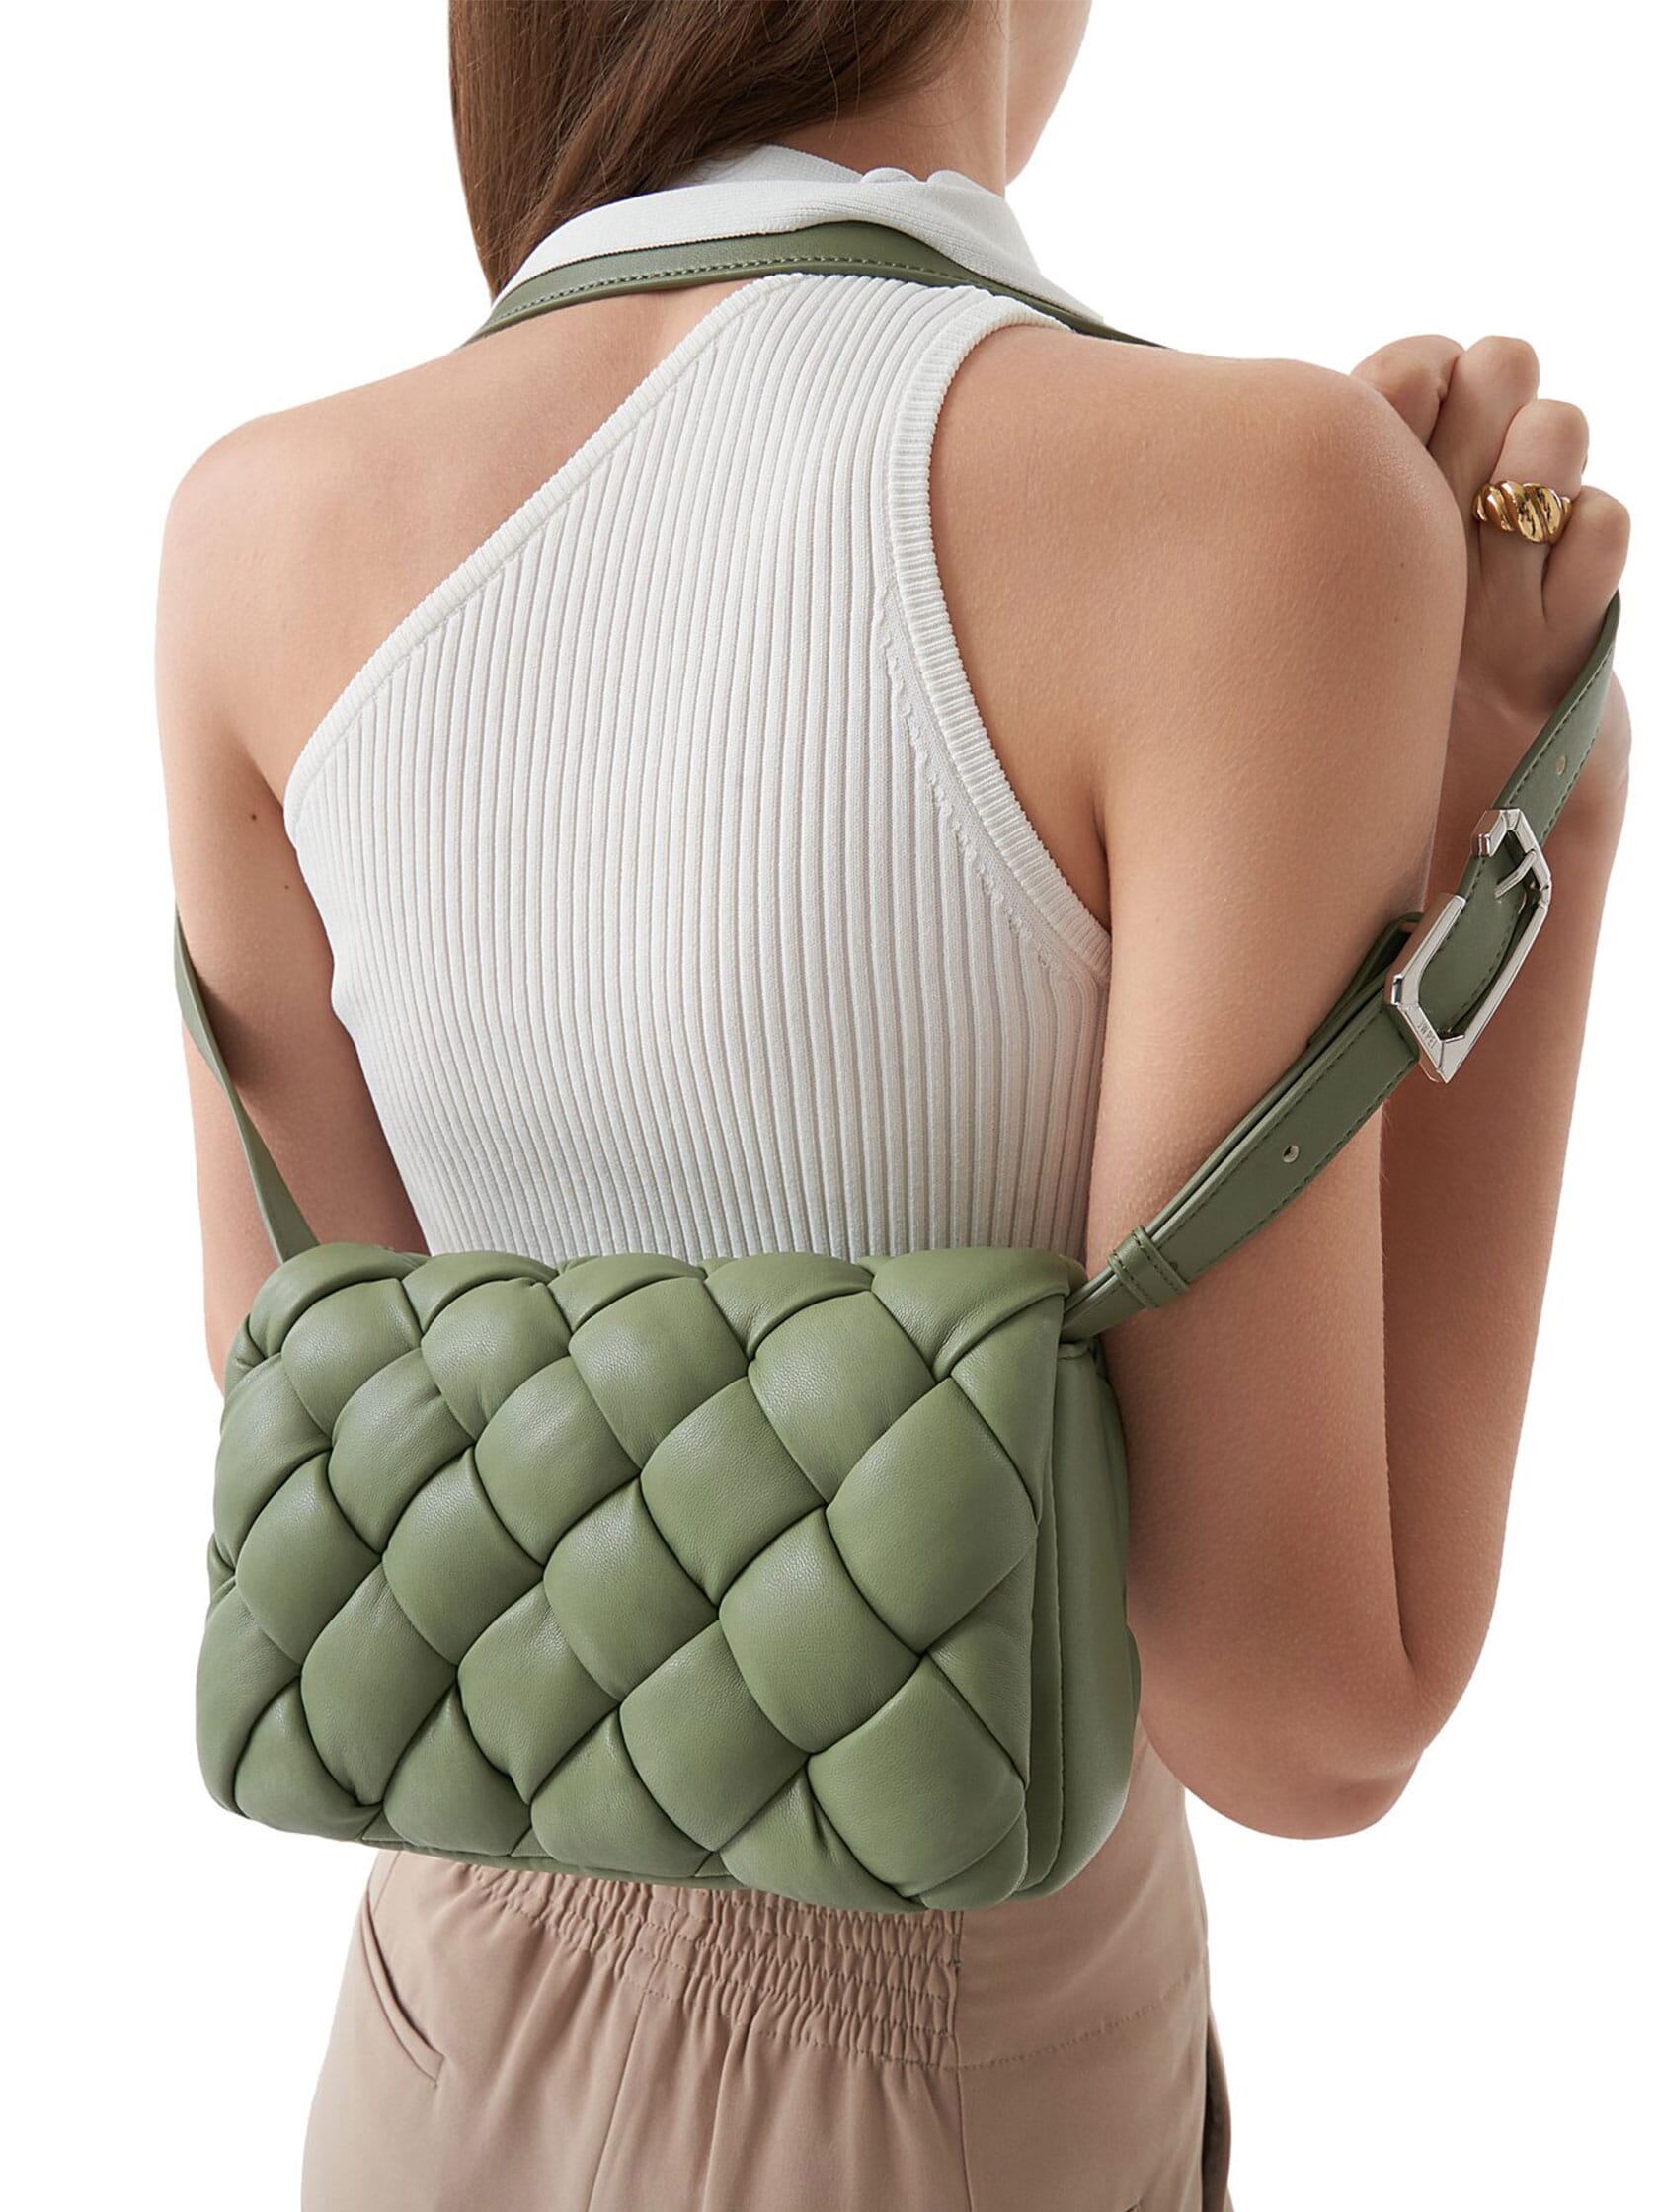 JW PEI MAZE BAG in SAGE GREEN  REVIEW TIPS AND MOD SHOTS [ENG] 